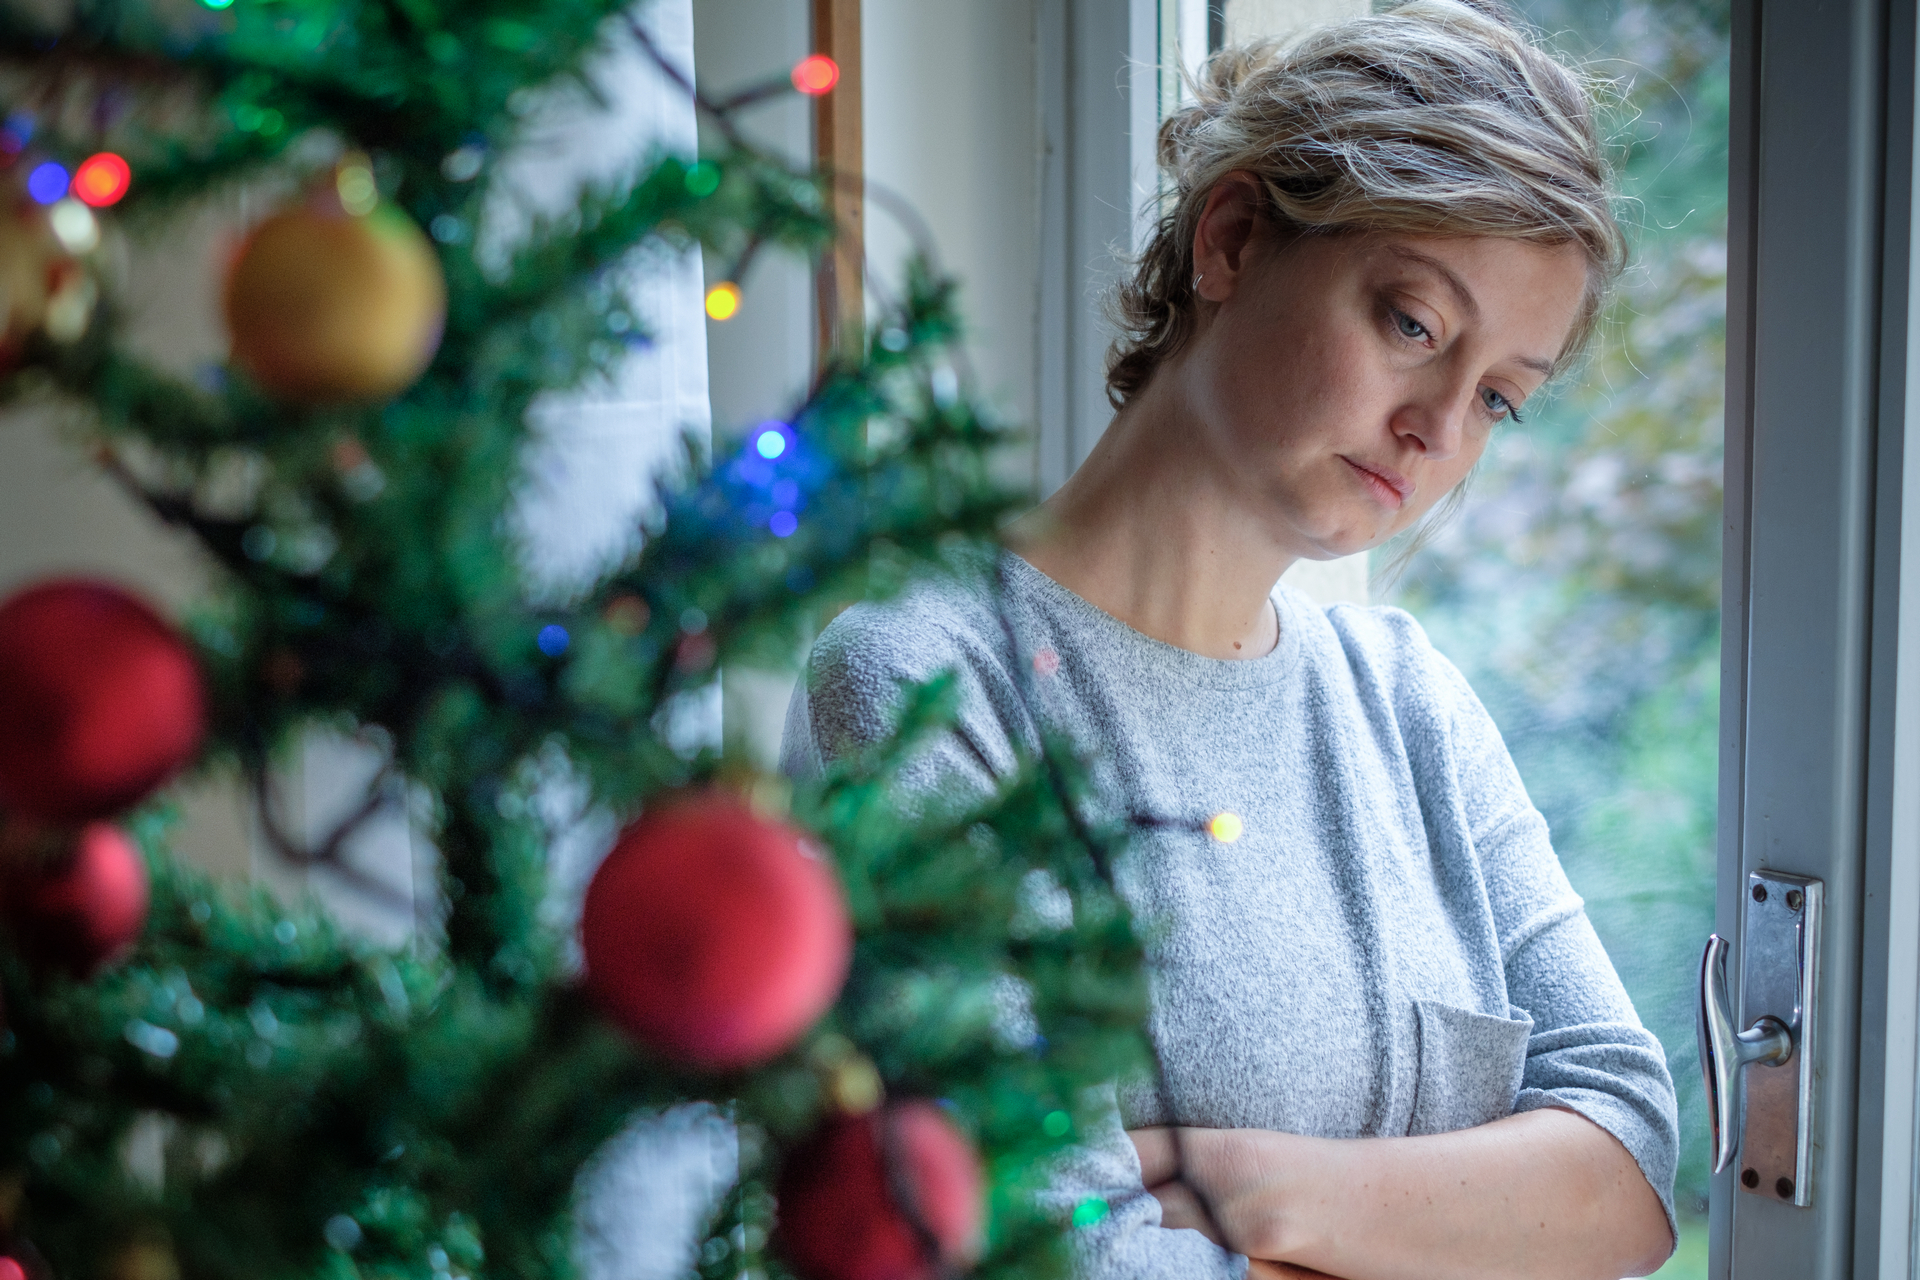 Depressed woman at Christmas time. Photo © Tommaso79. License: Shutter Stock. File ID: 1231458337